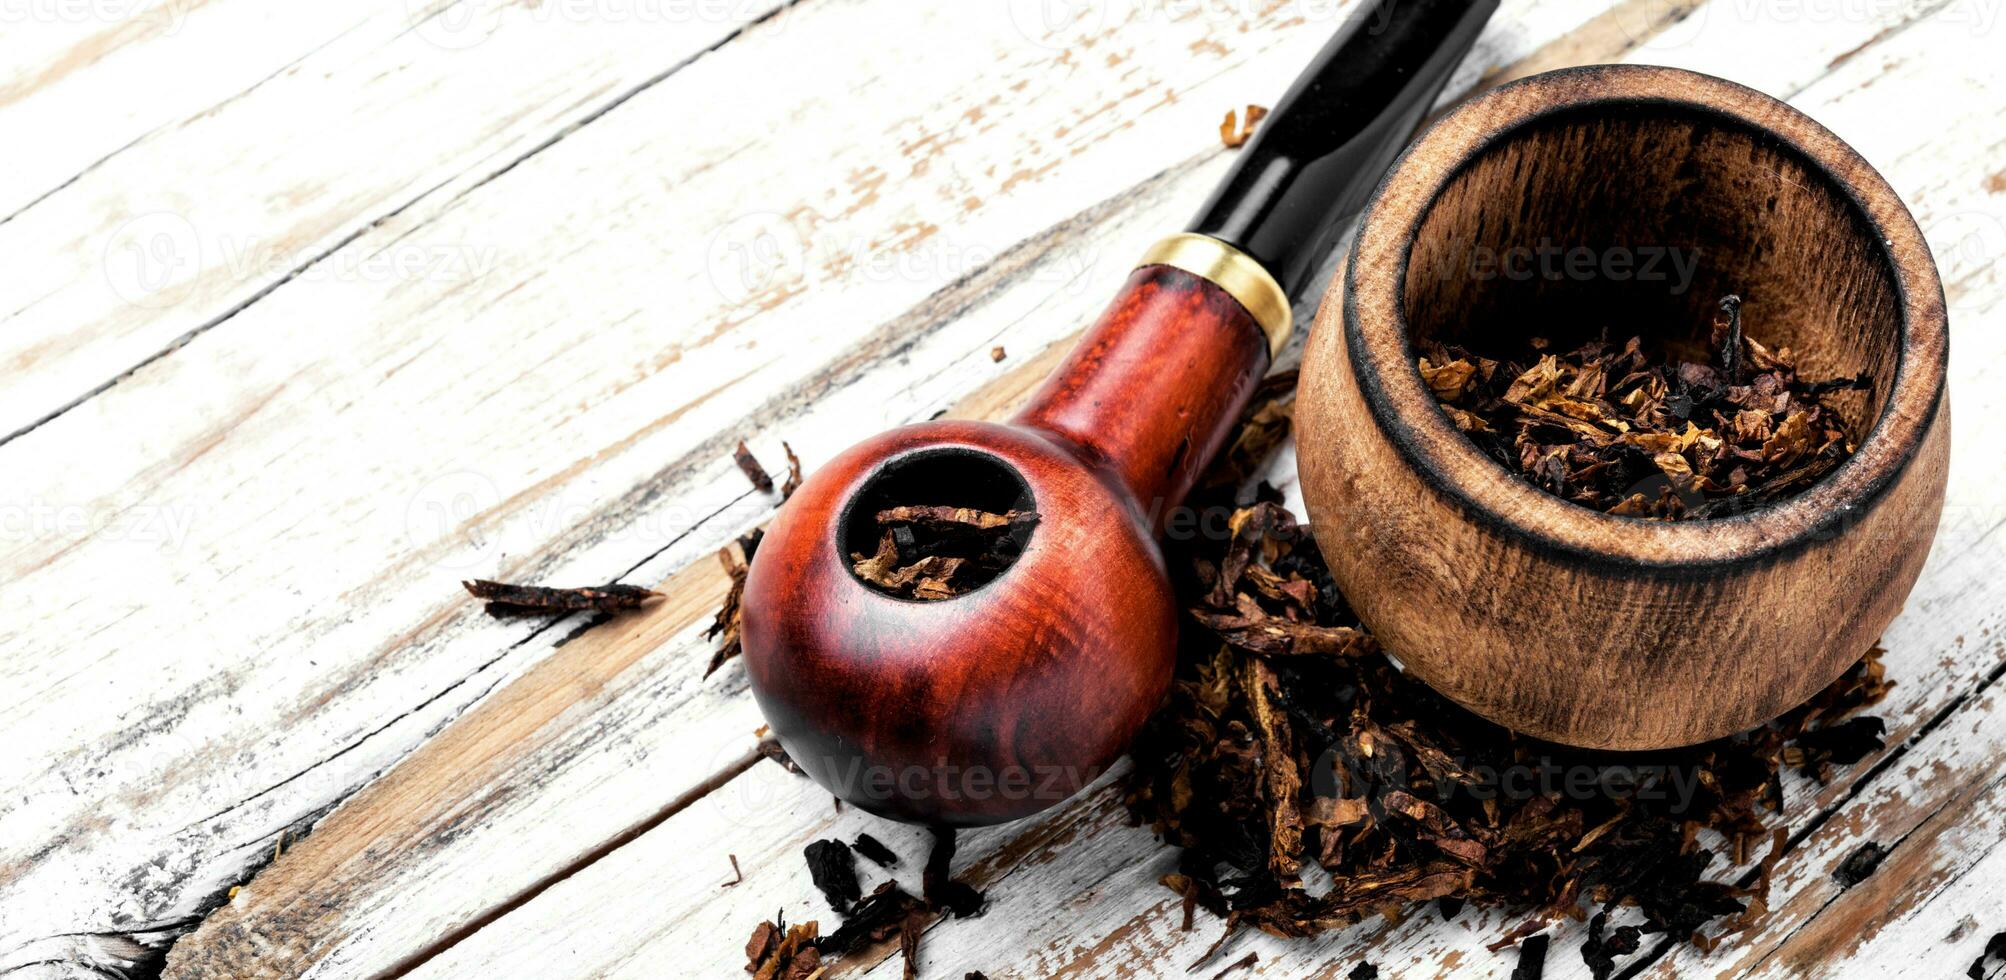 Smoking pipe on a wooden table photo